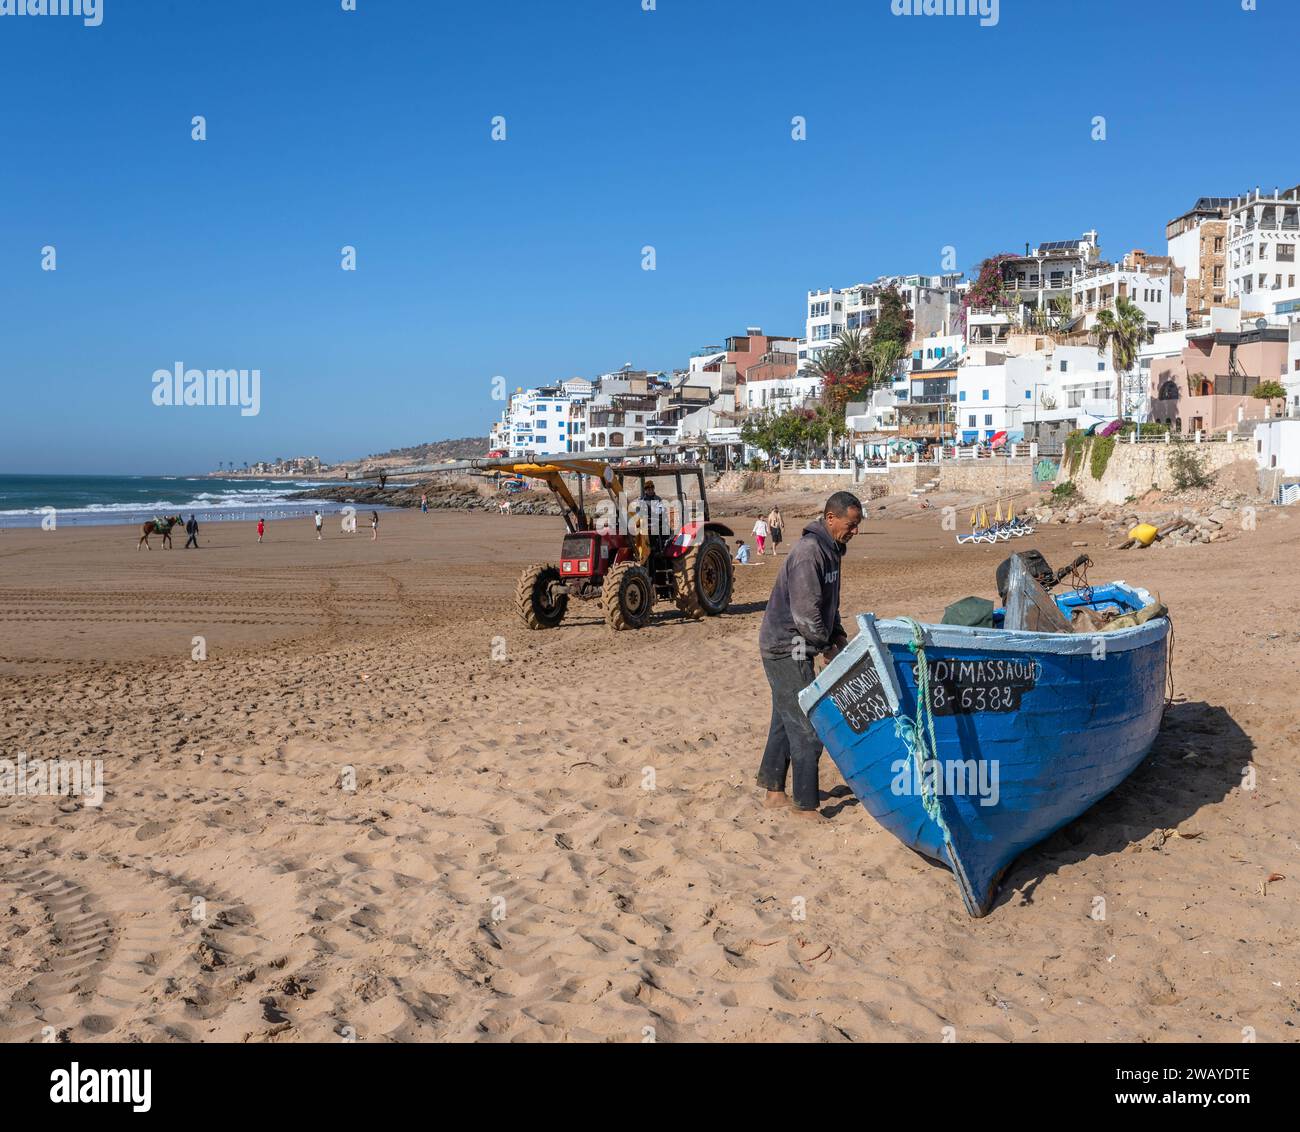 Small, Blue, Wooden Fishing Boats on the Beach in Taghazout, Morocco, North Africa Stock Photo